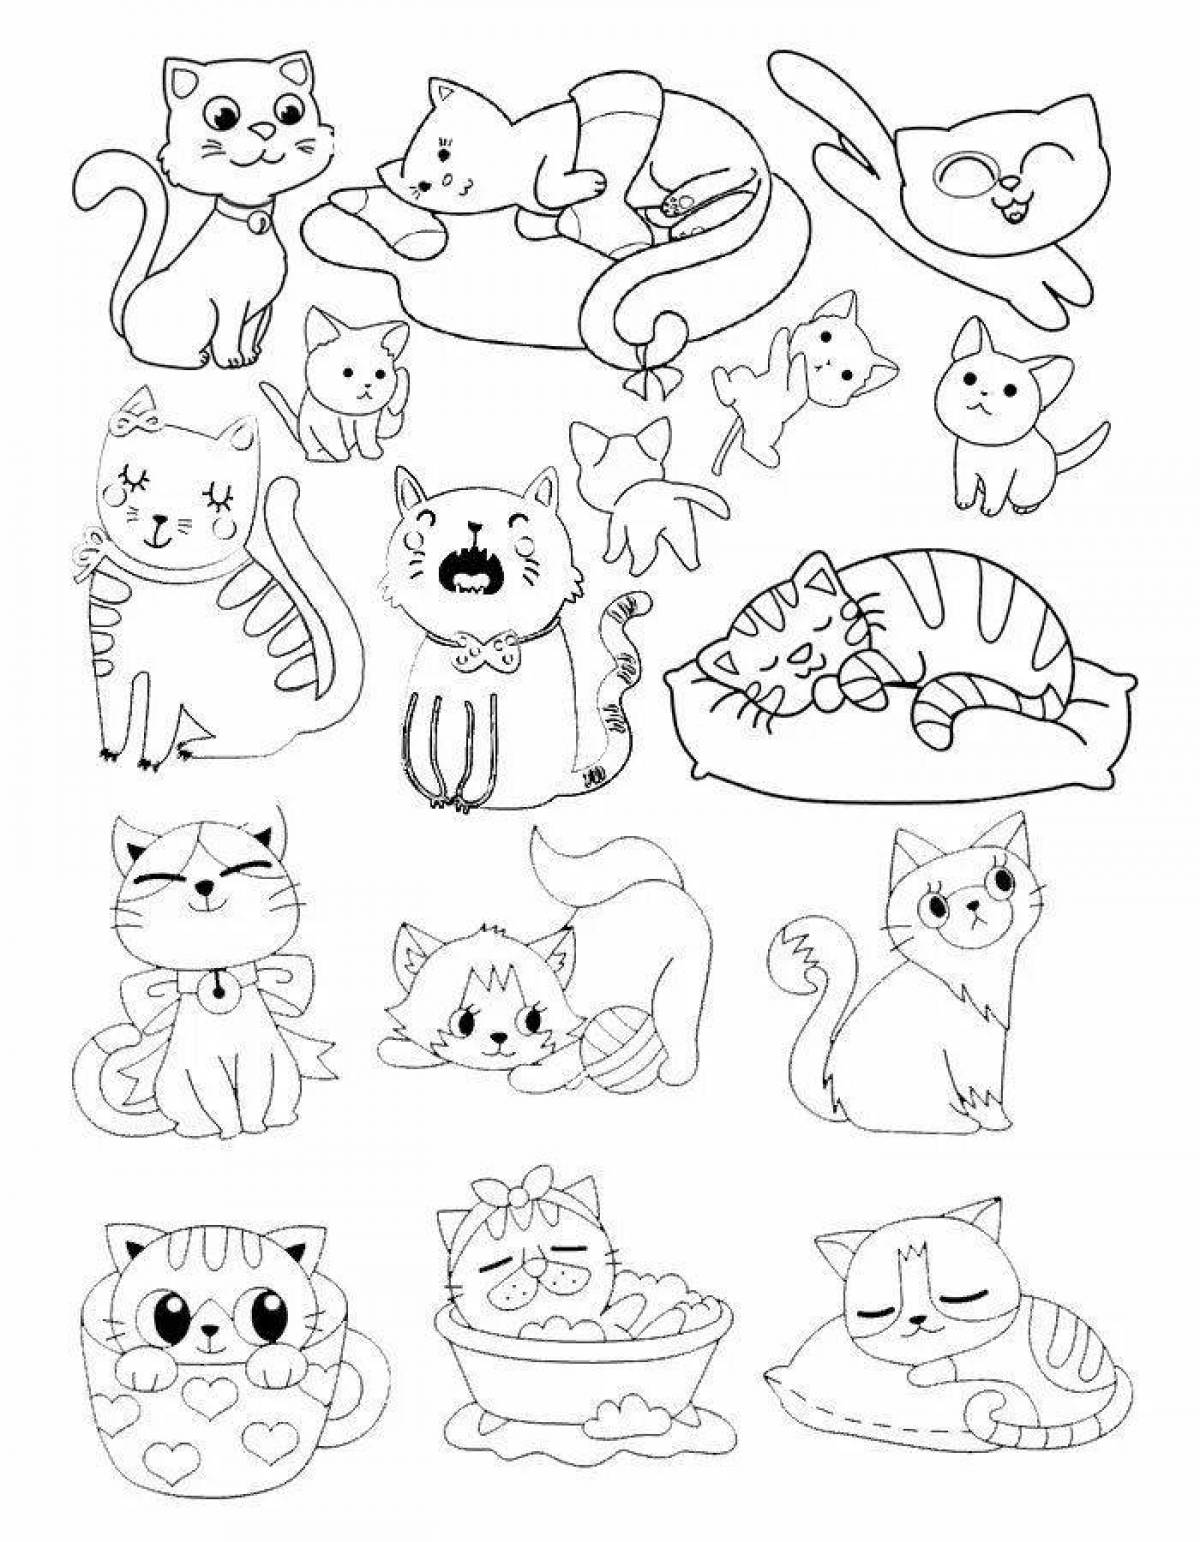 Coloring book funny cat sticker